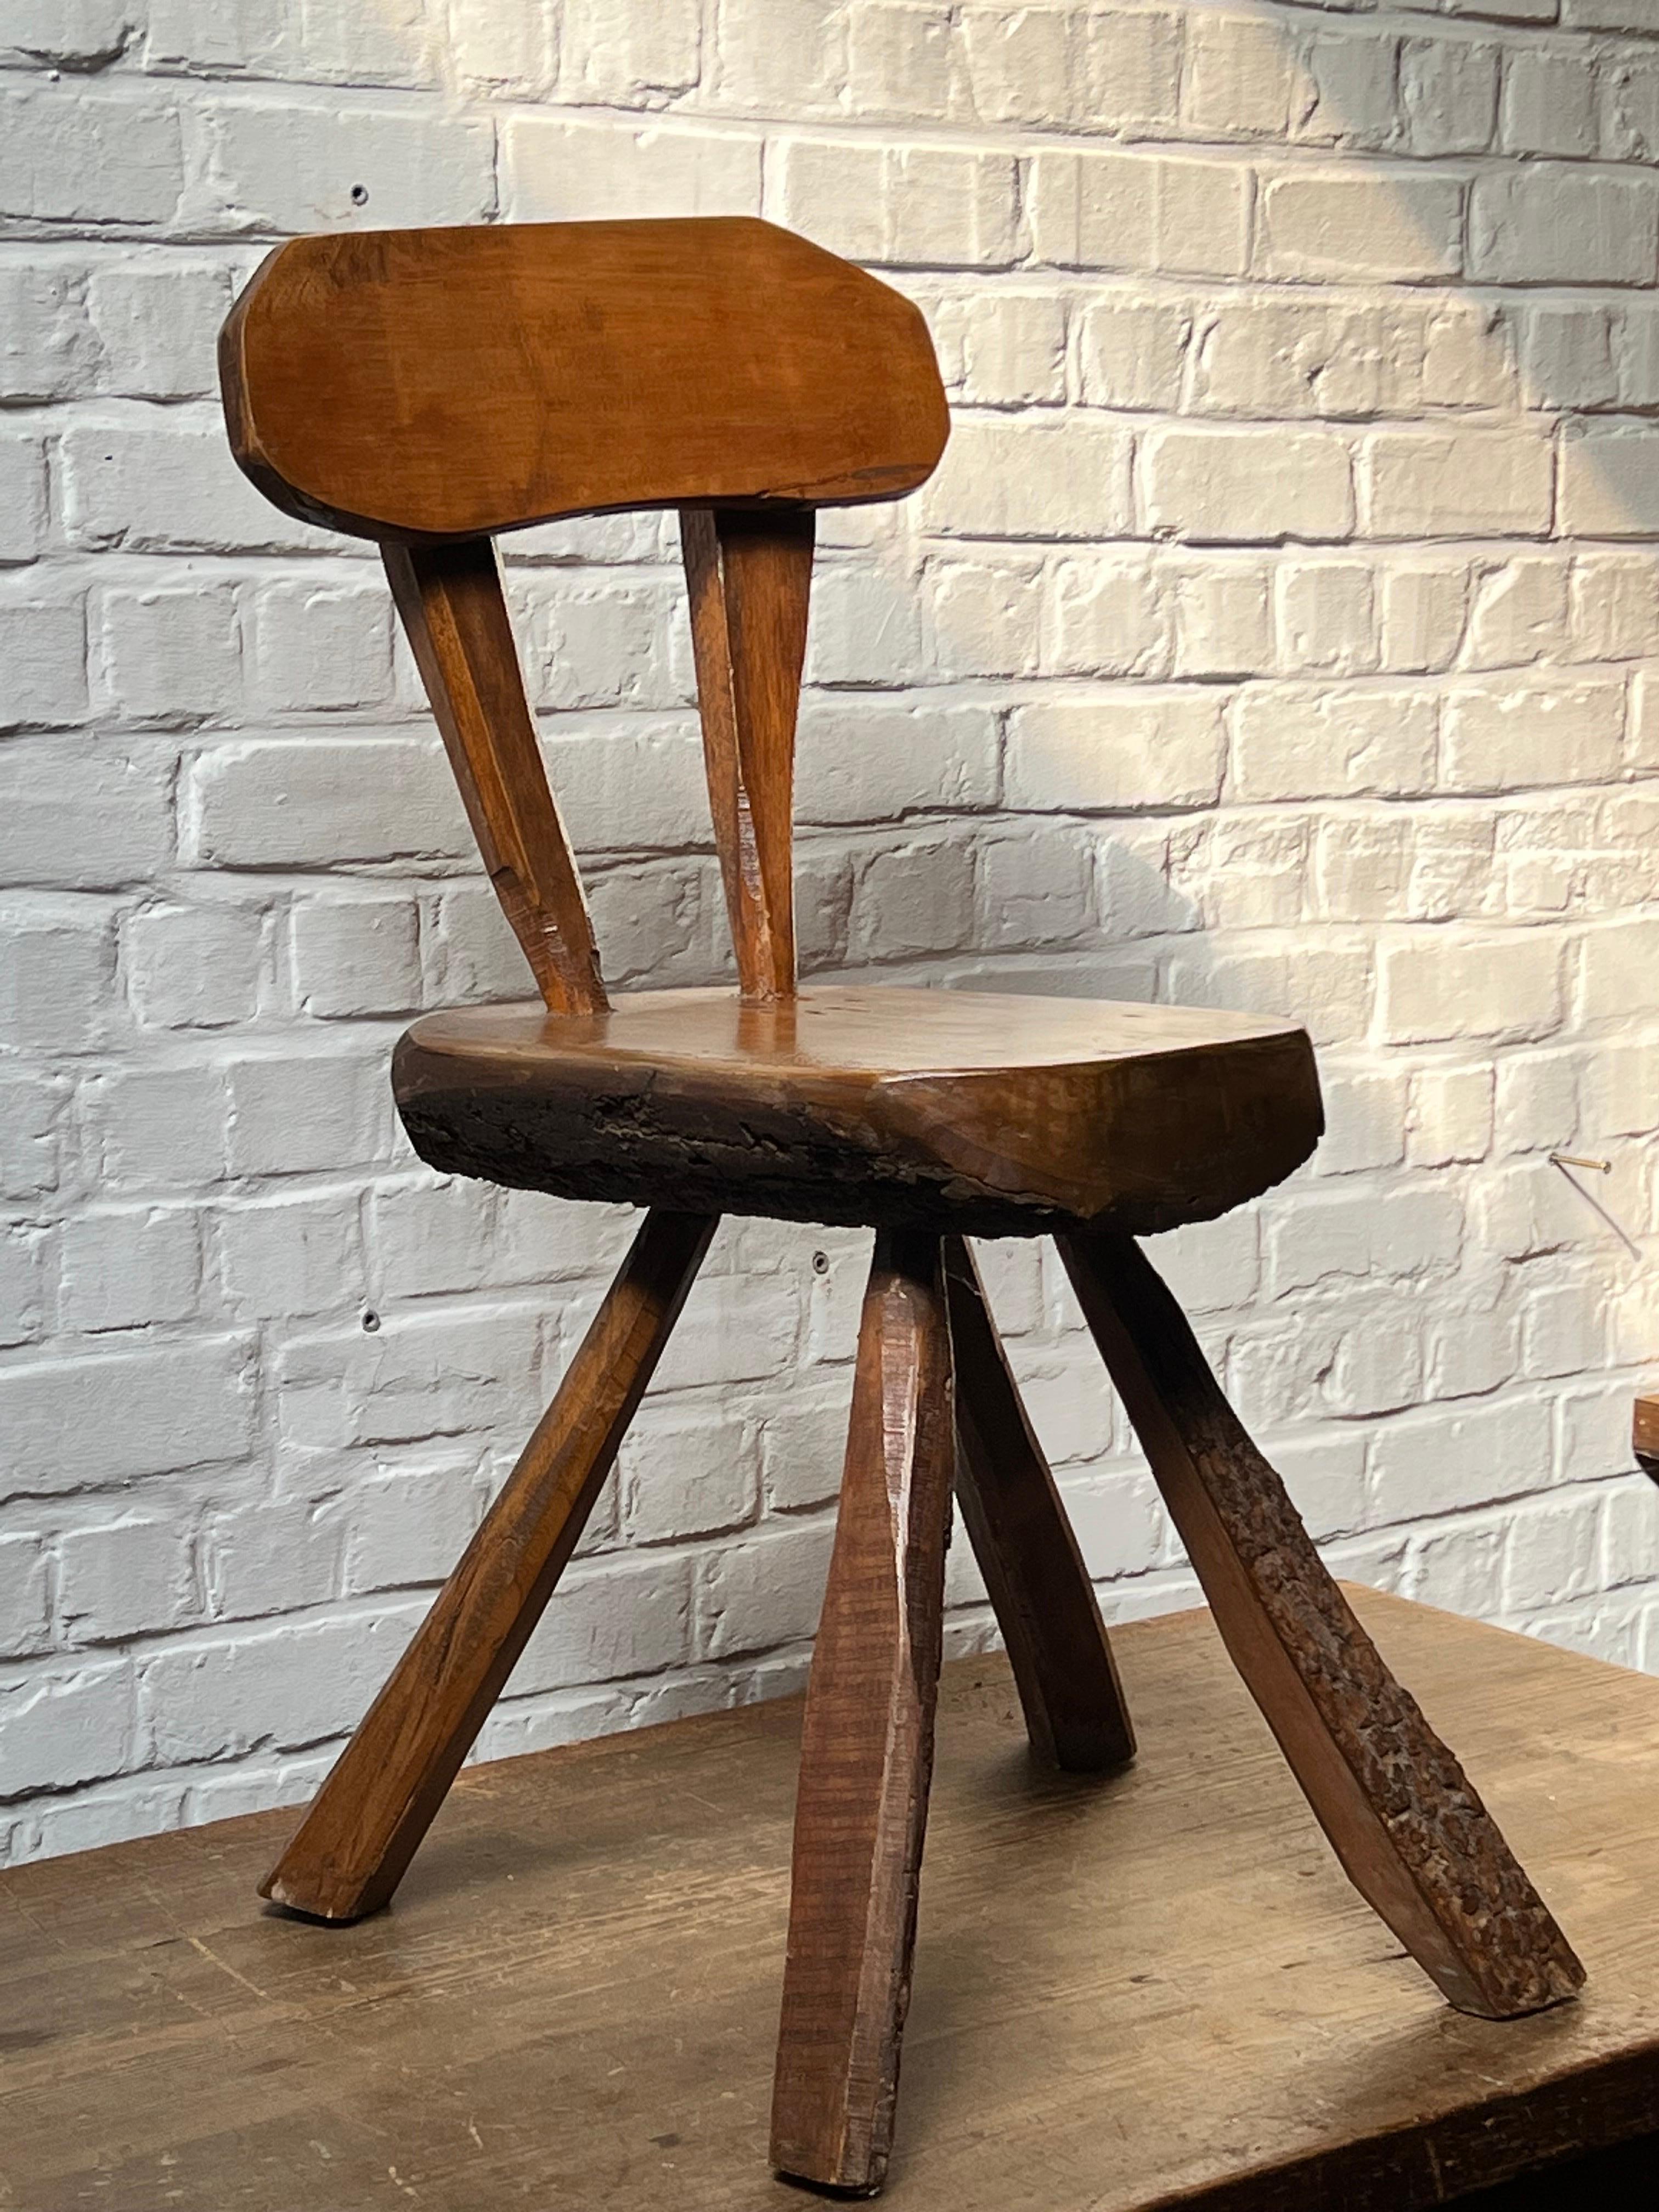 Very unique handmade with massive pine. Unusual chair. The overall is patinated and shows various shades of brown/brownish colors. Elegant and brutalist describe that chair properly. Very strong eye catcher chair.